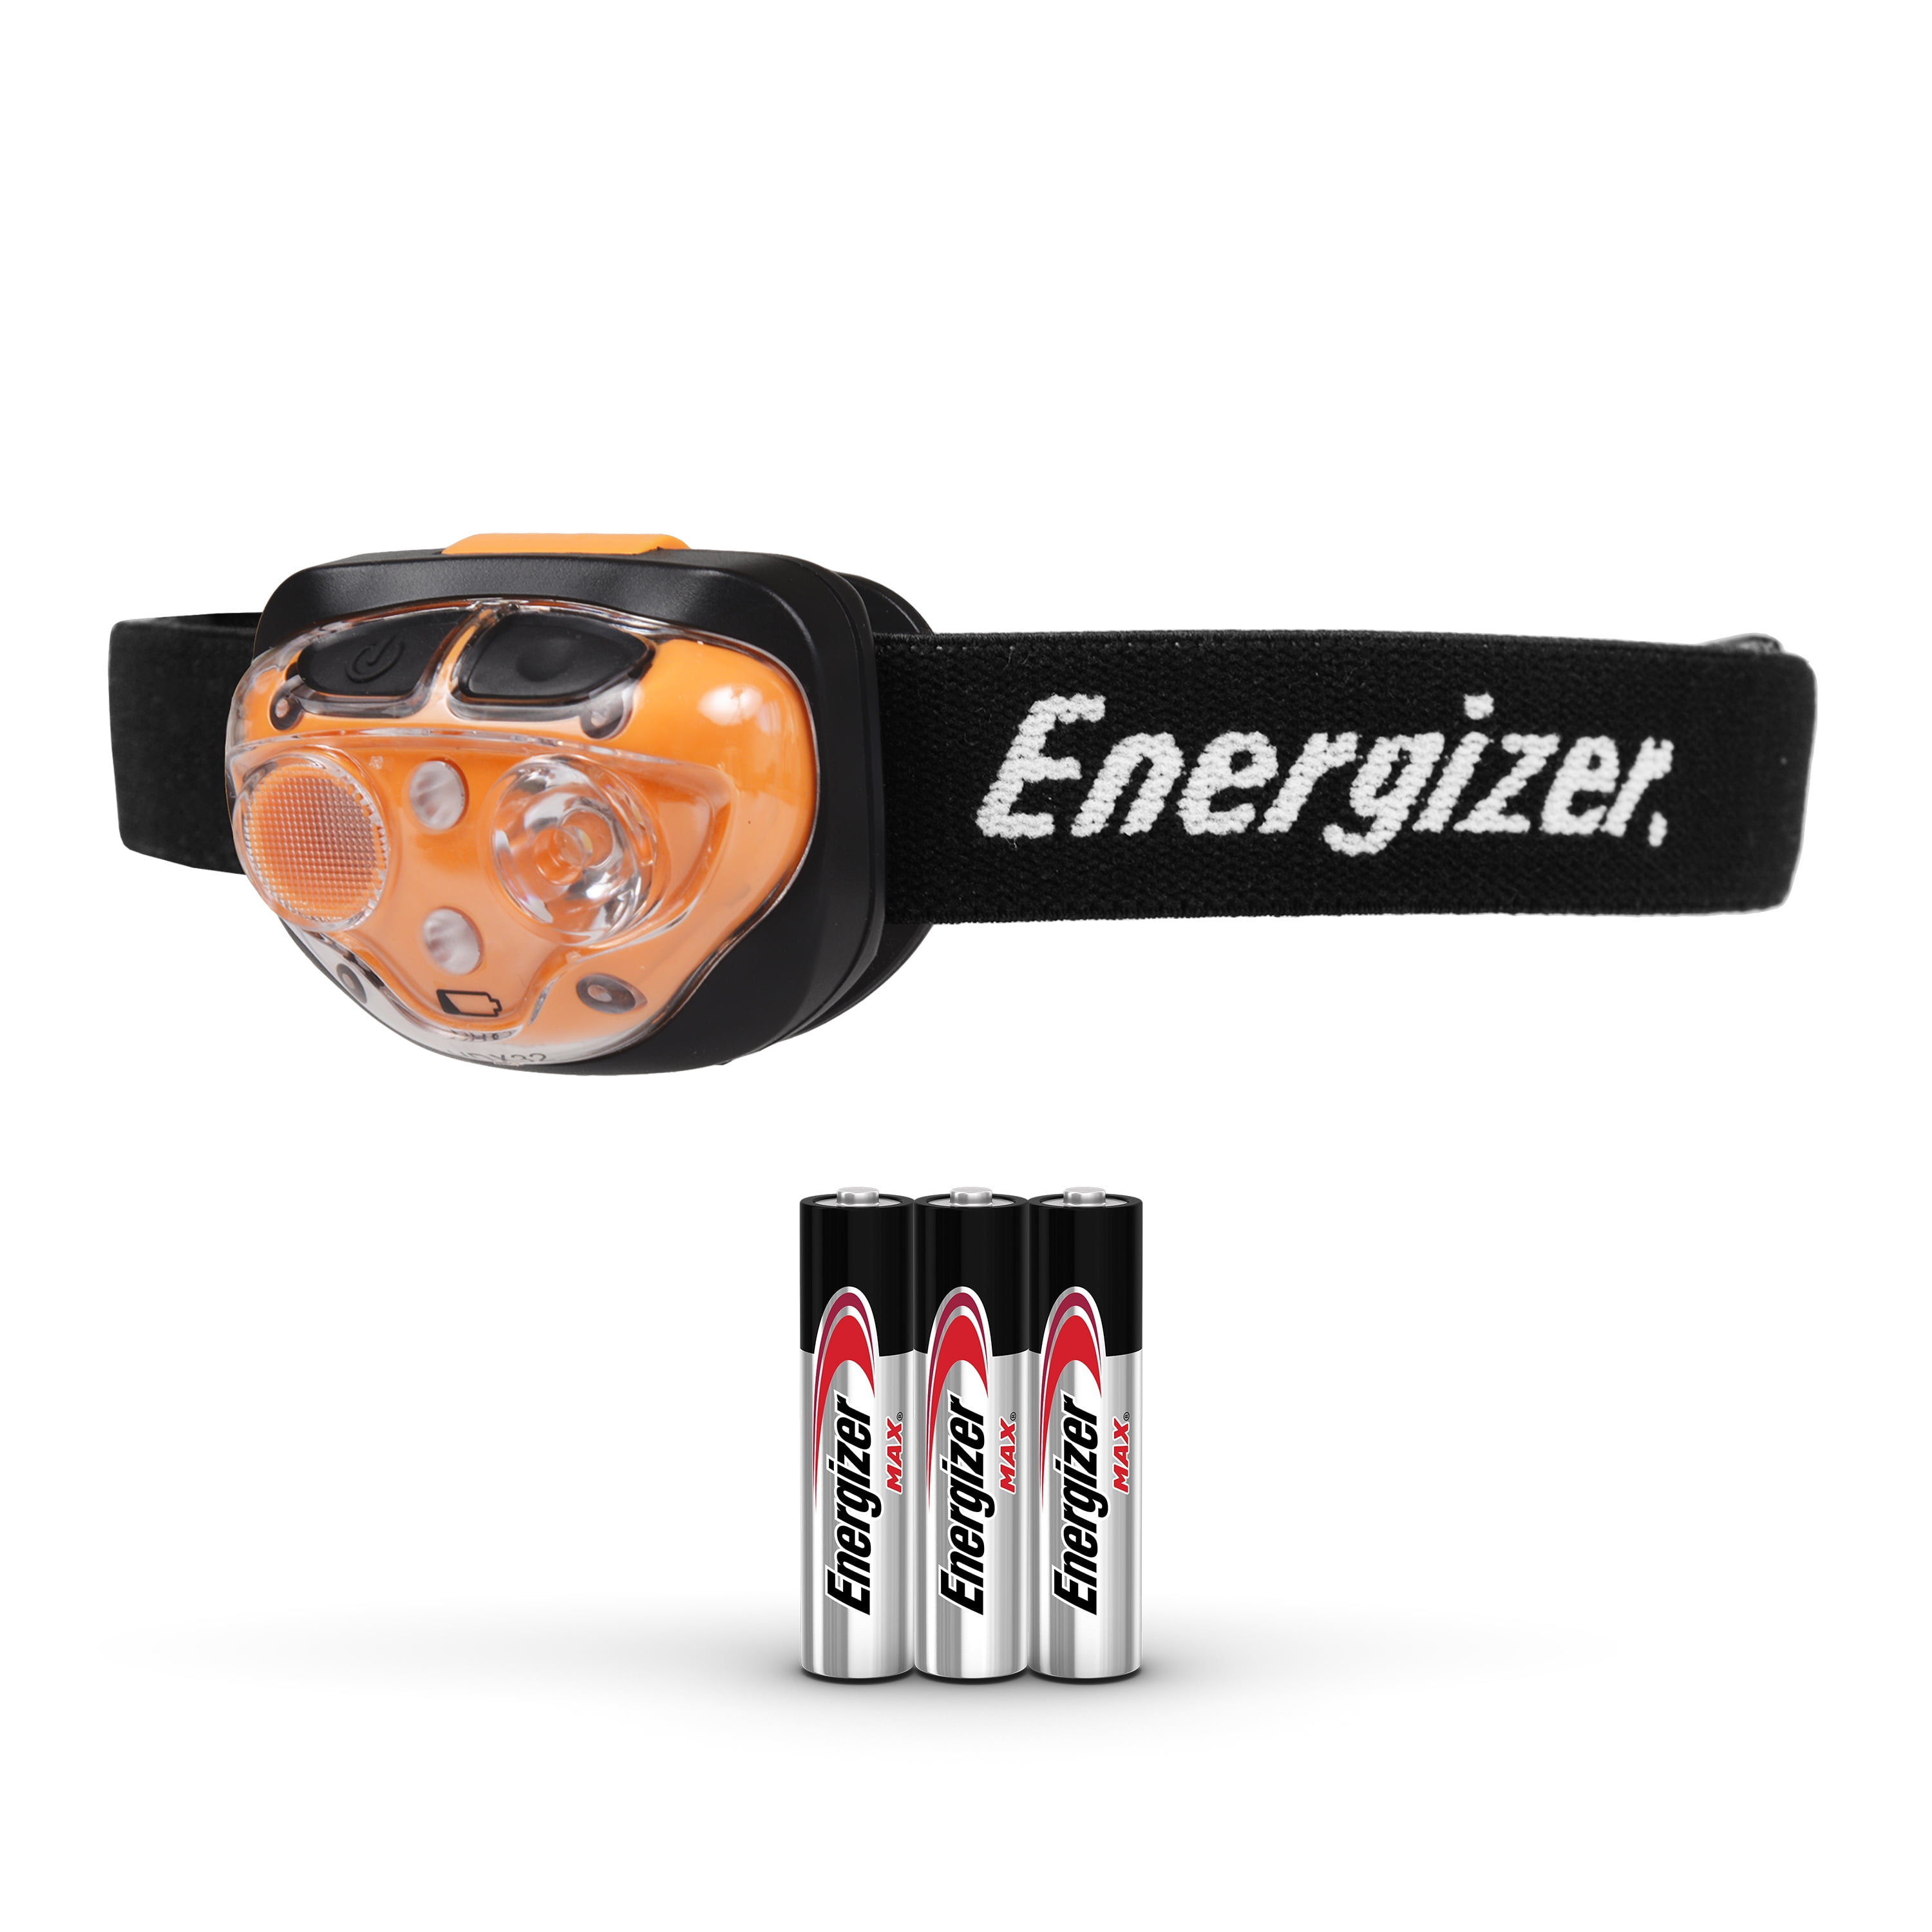 Energizer Vision LED Headlight 100 Lumen Head Torch Lamp 3 AAA Batteries Camping 